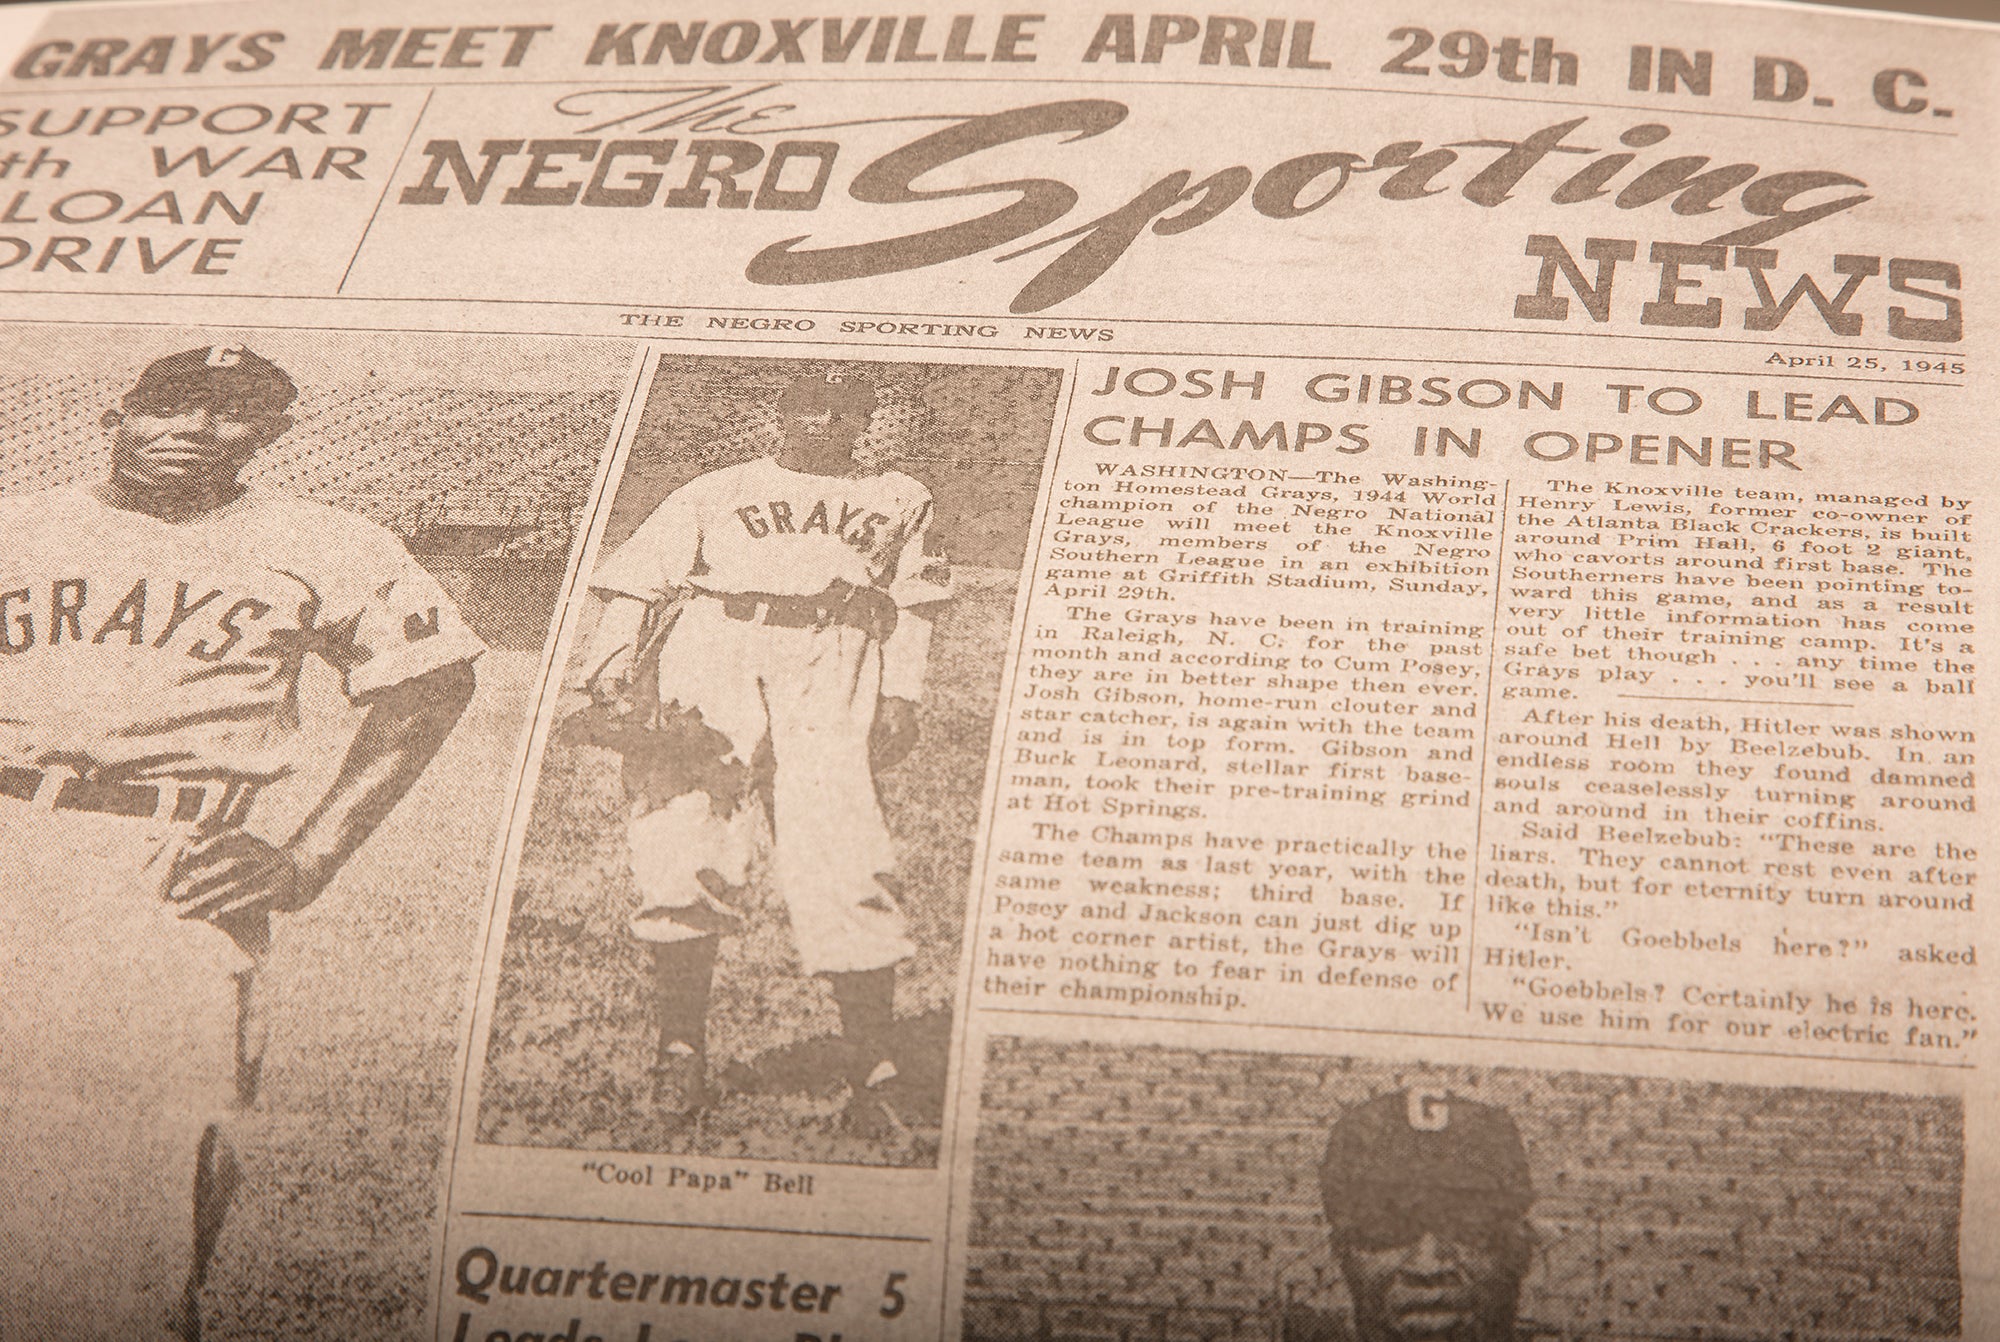 Black newspapers preserved Negro Leagues history